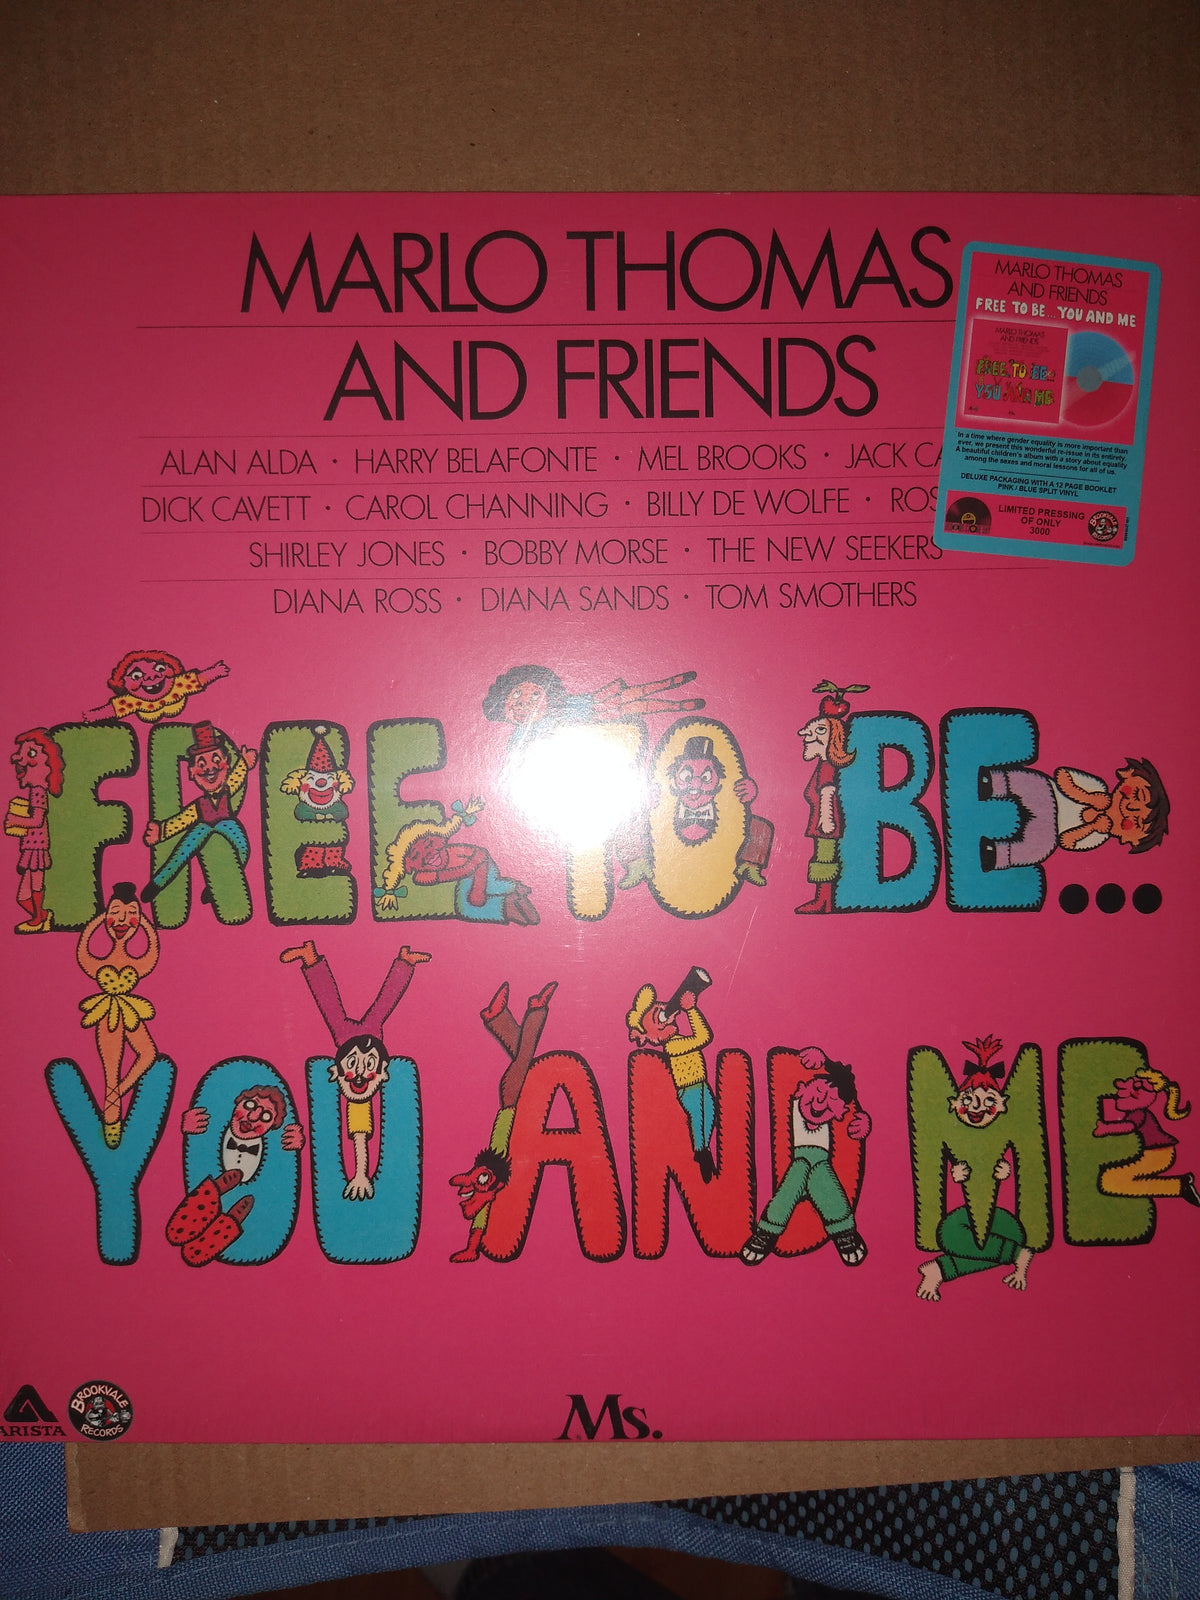 Free to be you and me Record store day Marlo Thomas